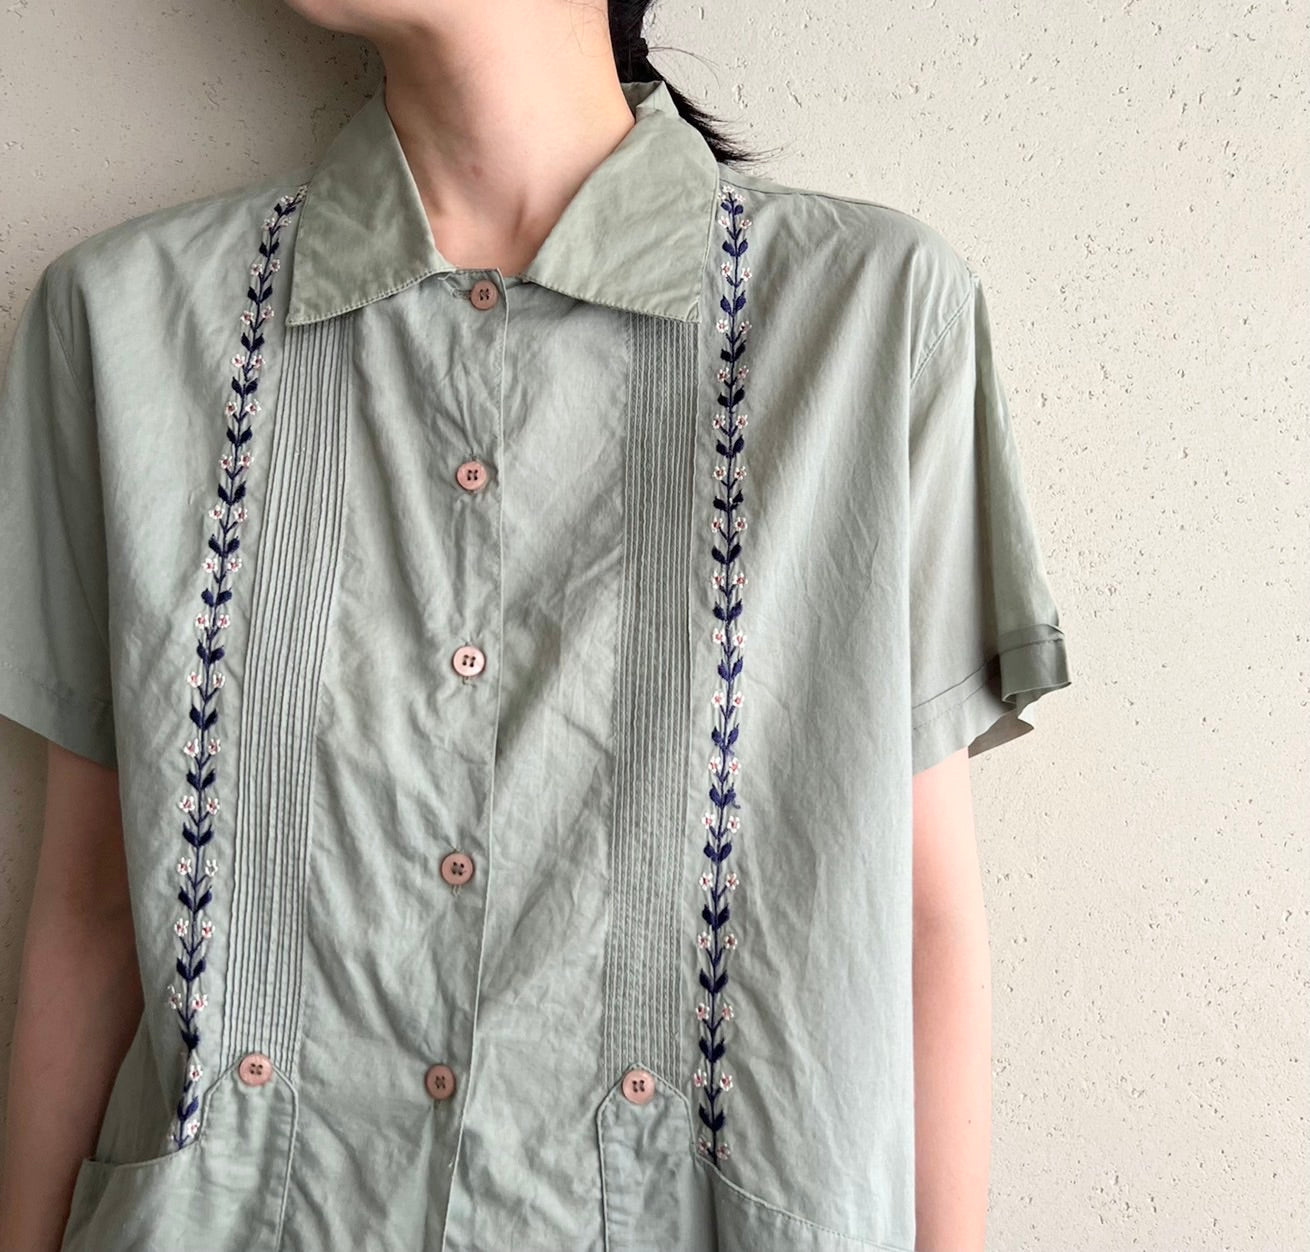 90s Embroidery Shirt